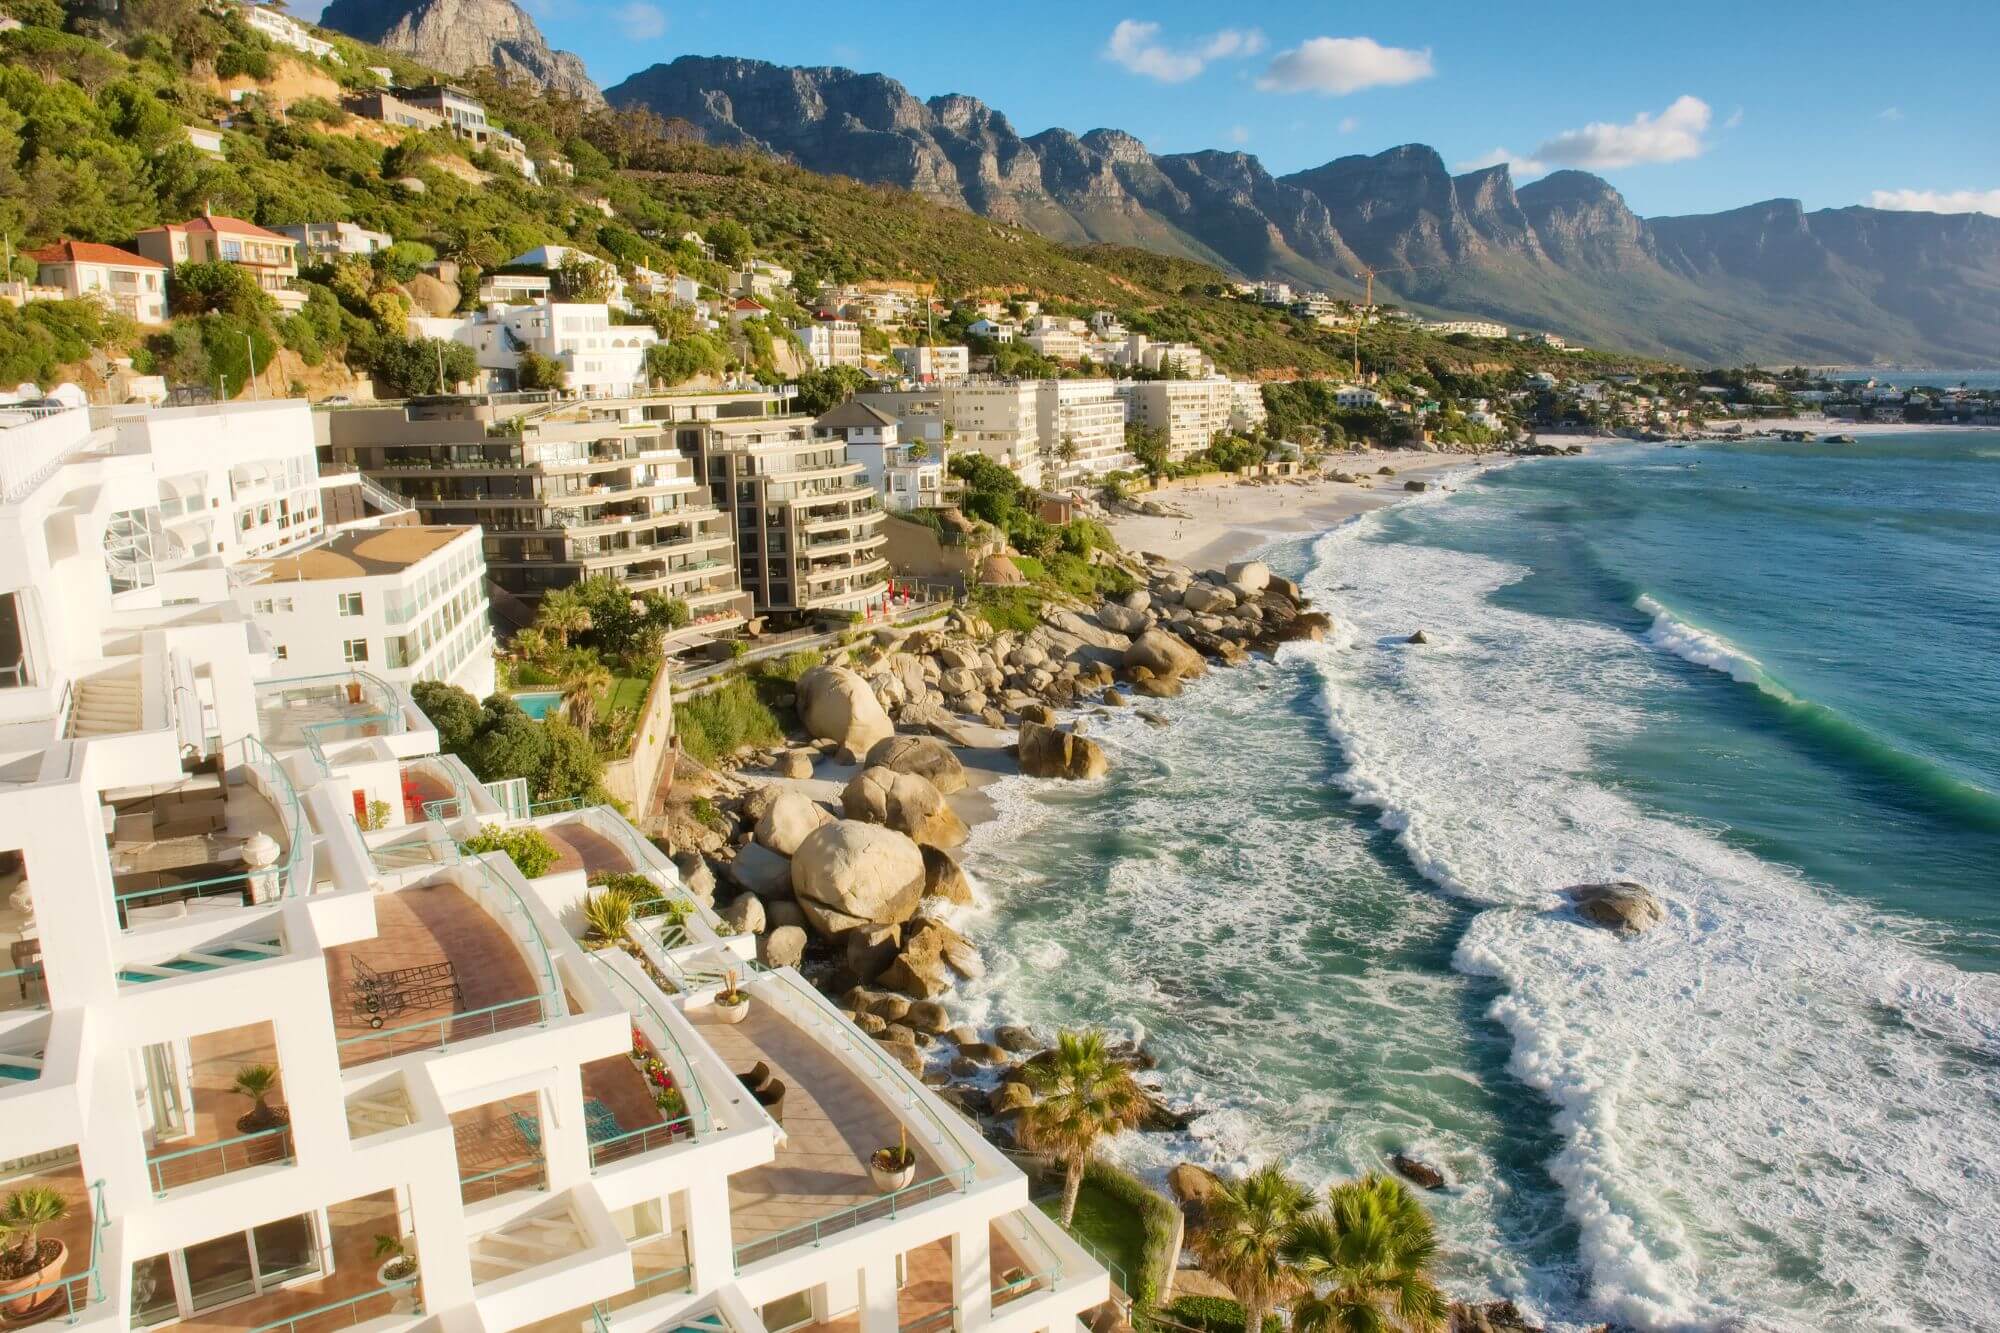 Thinking of investing in Cape Town or further afield? Lock-up-and-go investment properties have become more and more popular as investors realise the benefits of low maintenance, security and easy placing of tenants.